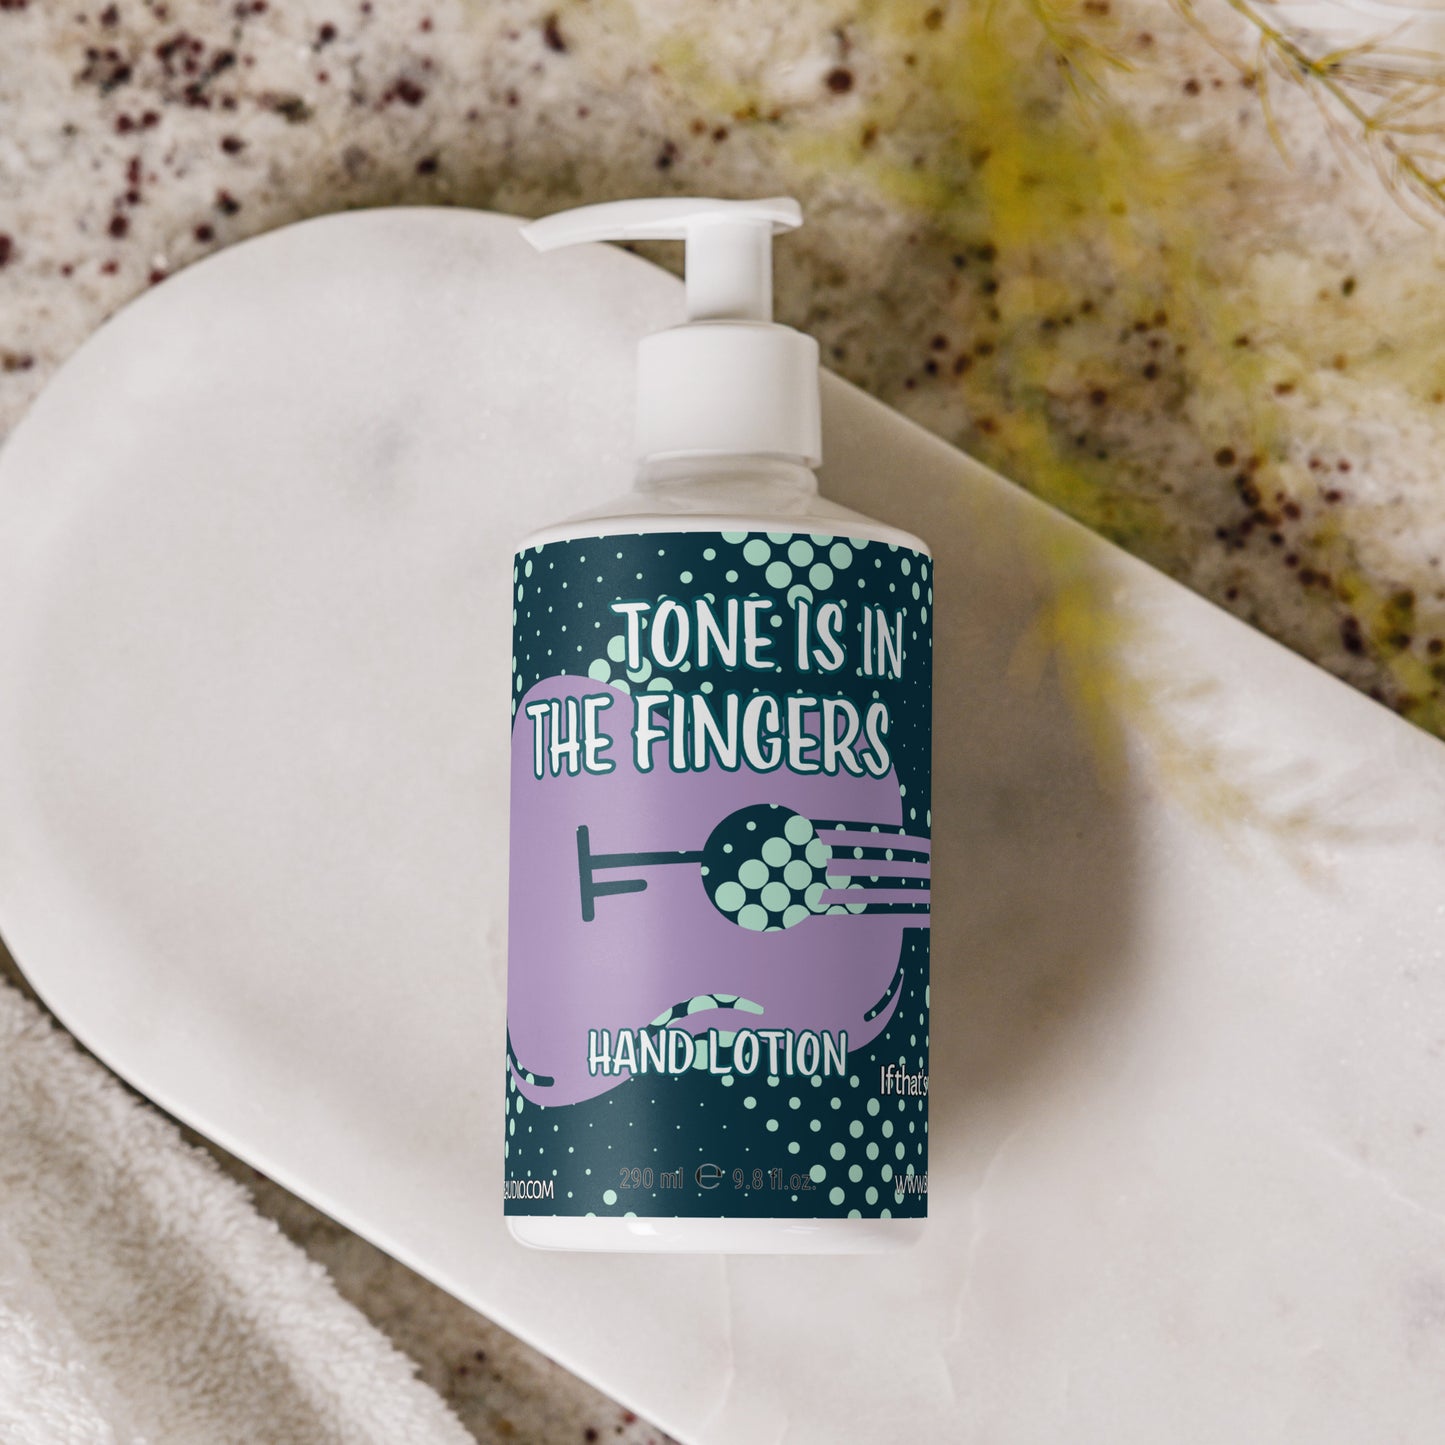 "Tone Is In The Fingers" refreshing hand & body lotion